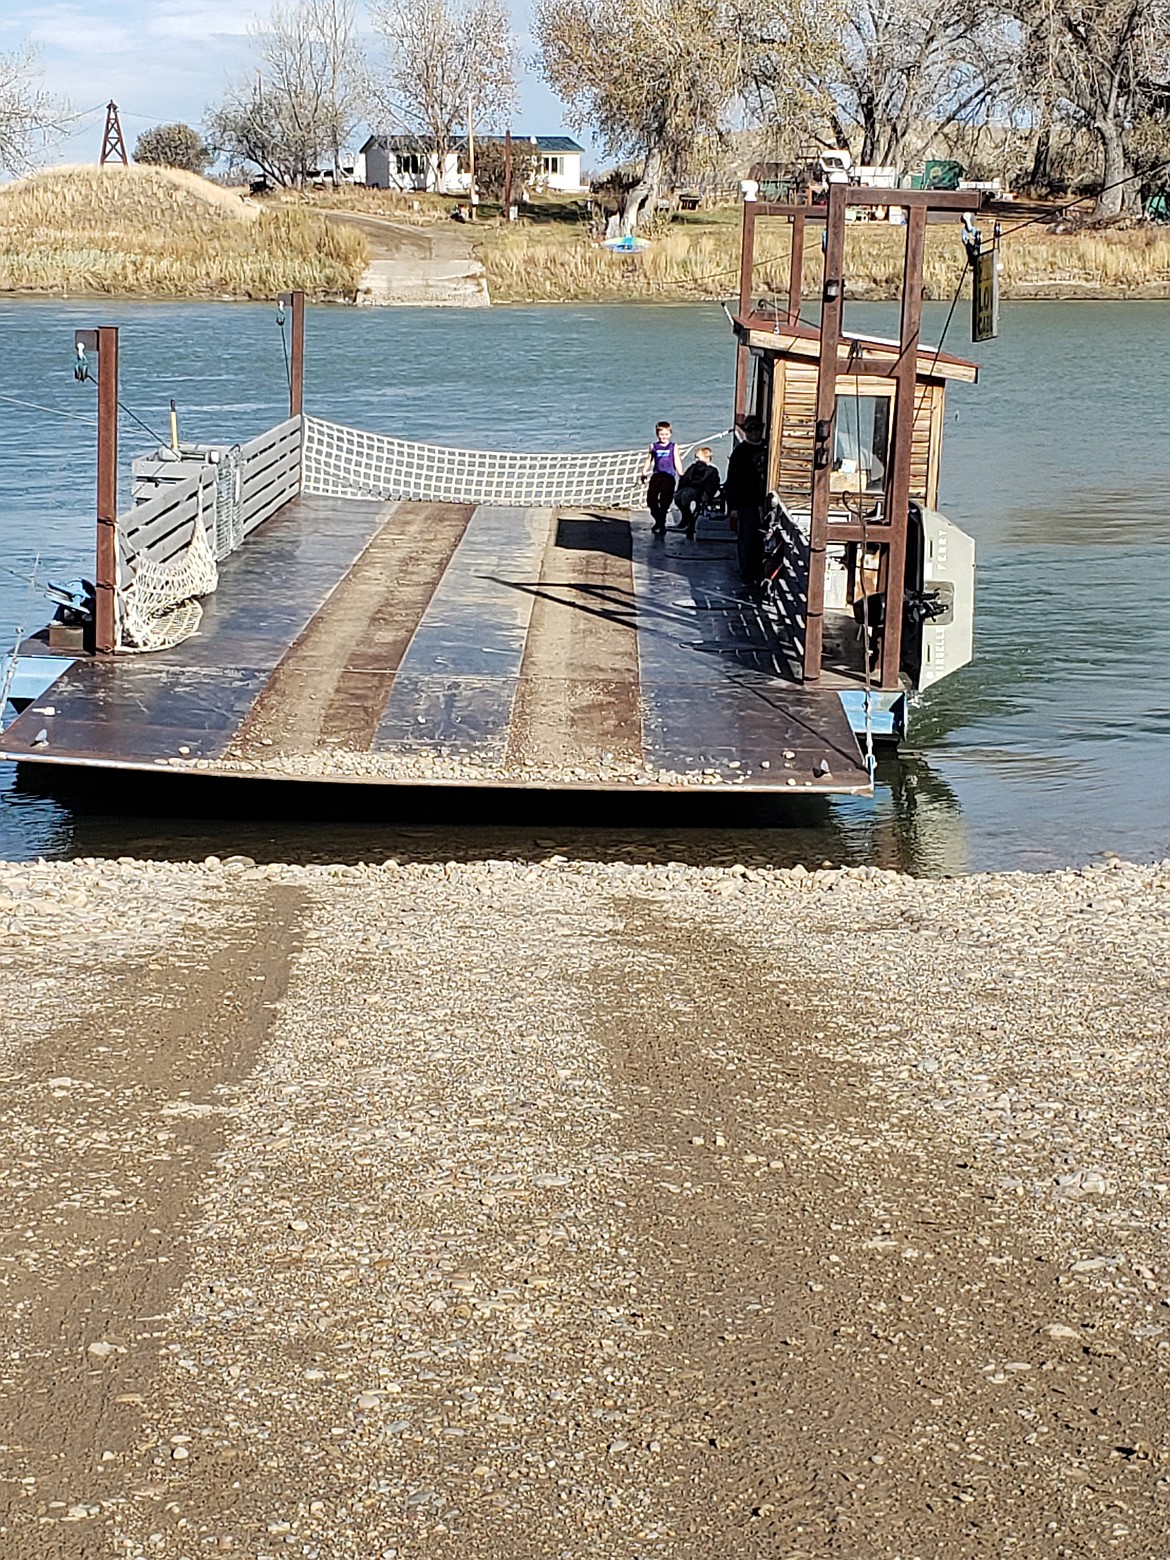 Established in 1913, the Virgelle Ferry is one of three ferries still running seasonally on the Upper Missouri River and is operated by Chouteau County as a road service. There is no charge to have your car ferried across the river.